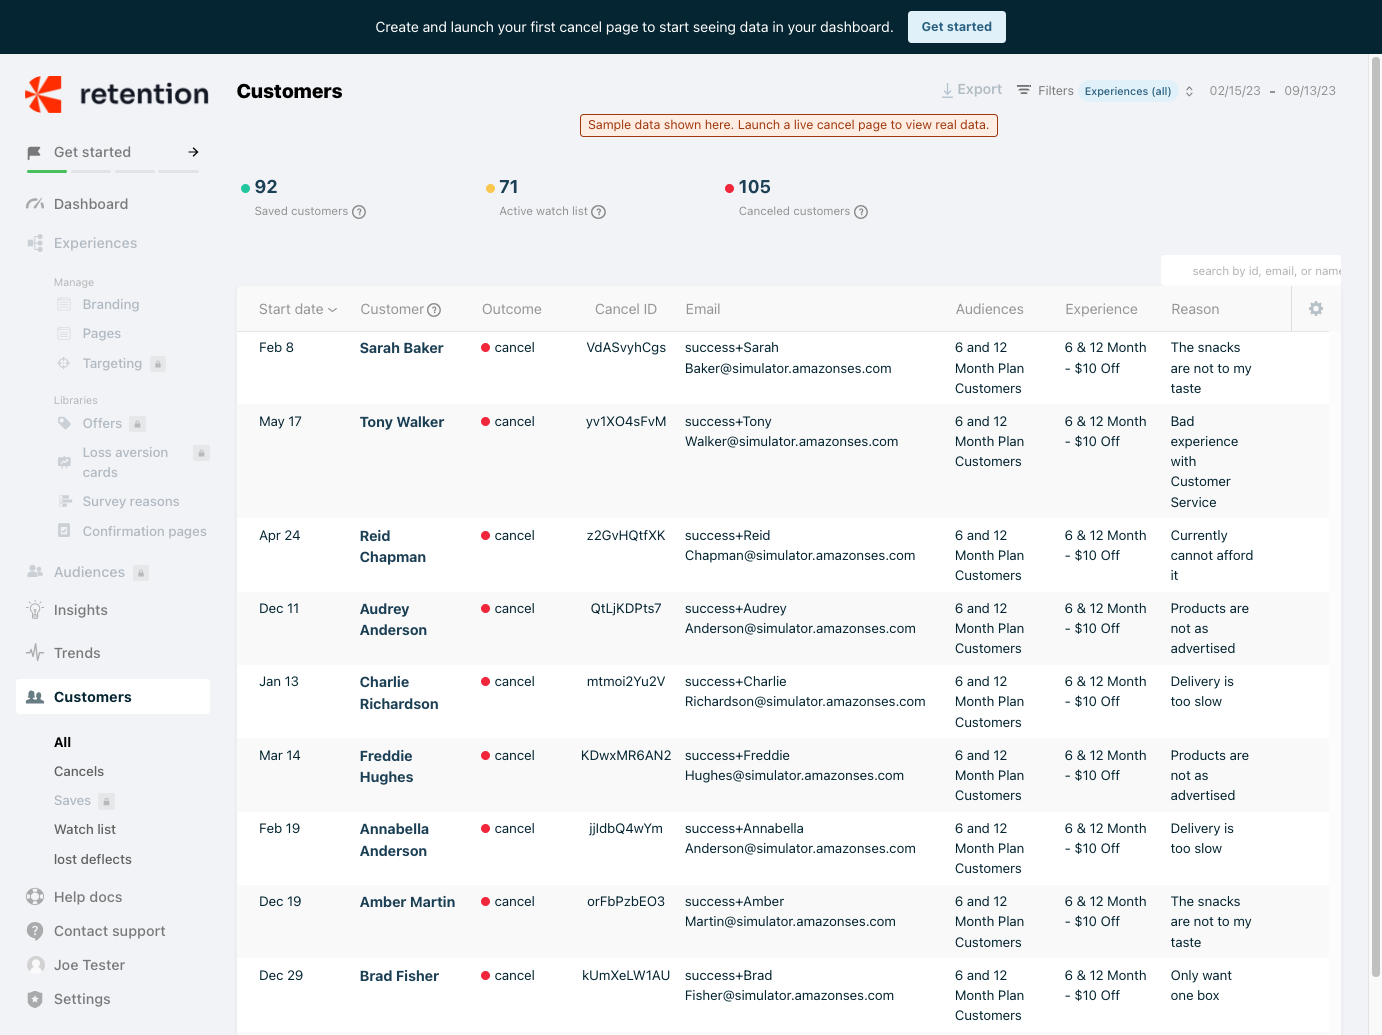 A screenshot of the Chargebee Retention dashboard showing the "Customers" selection in the navigation bar.